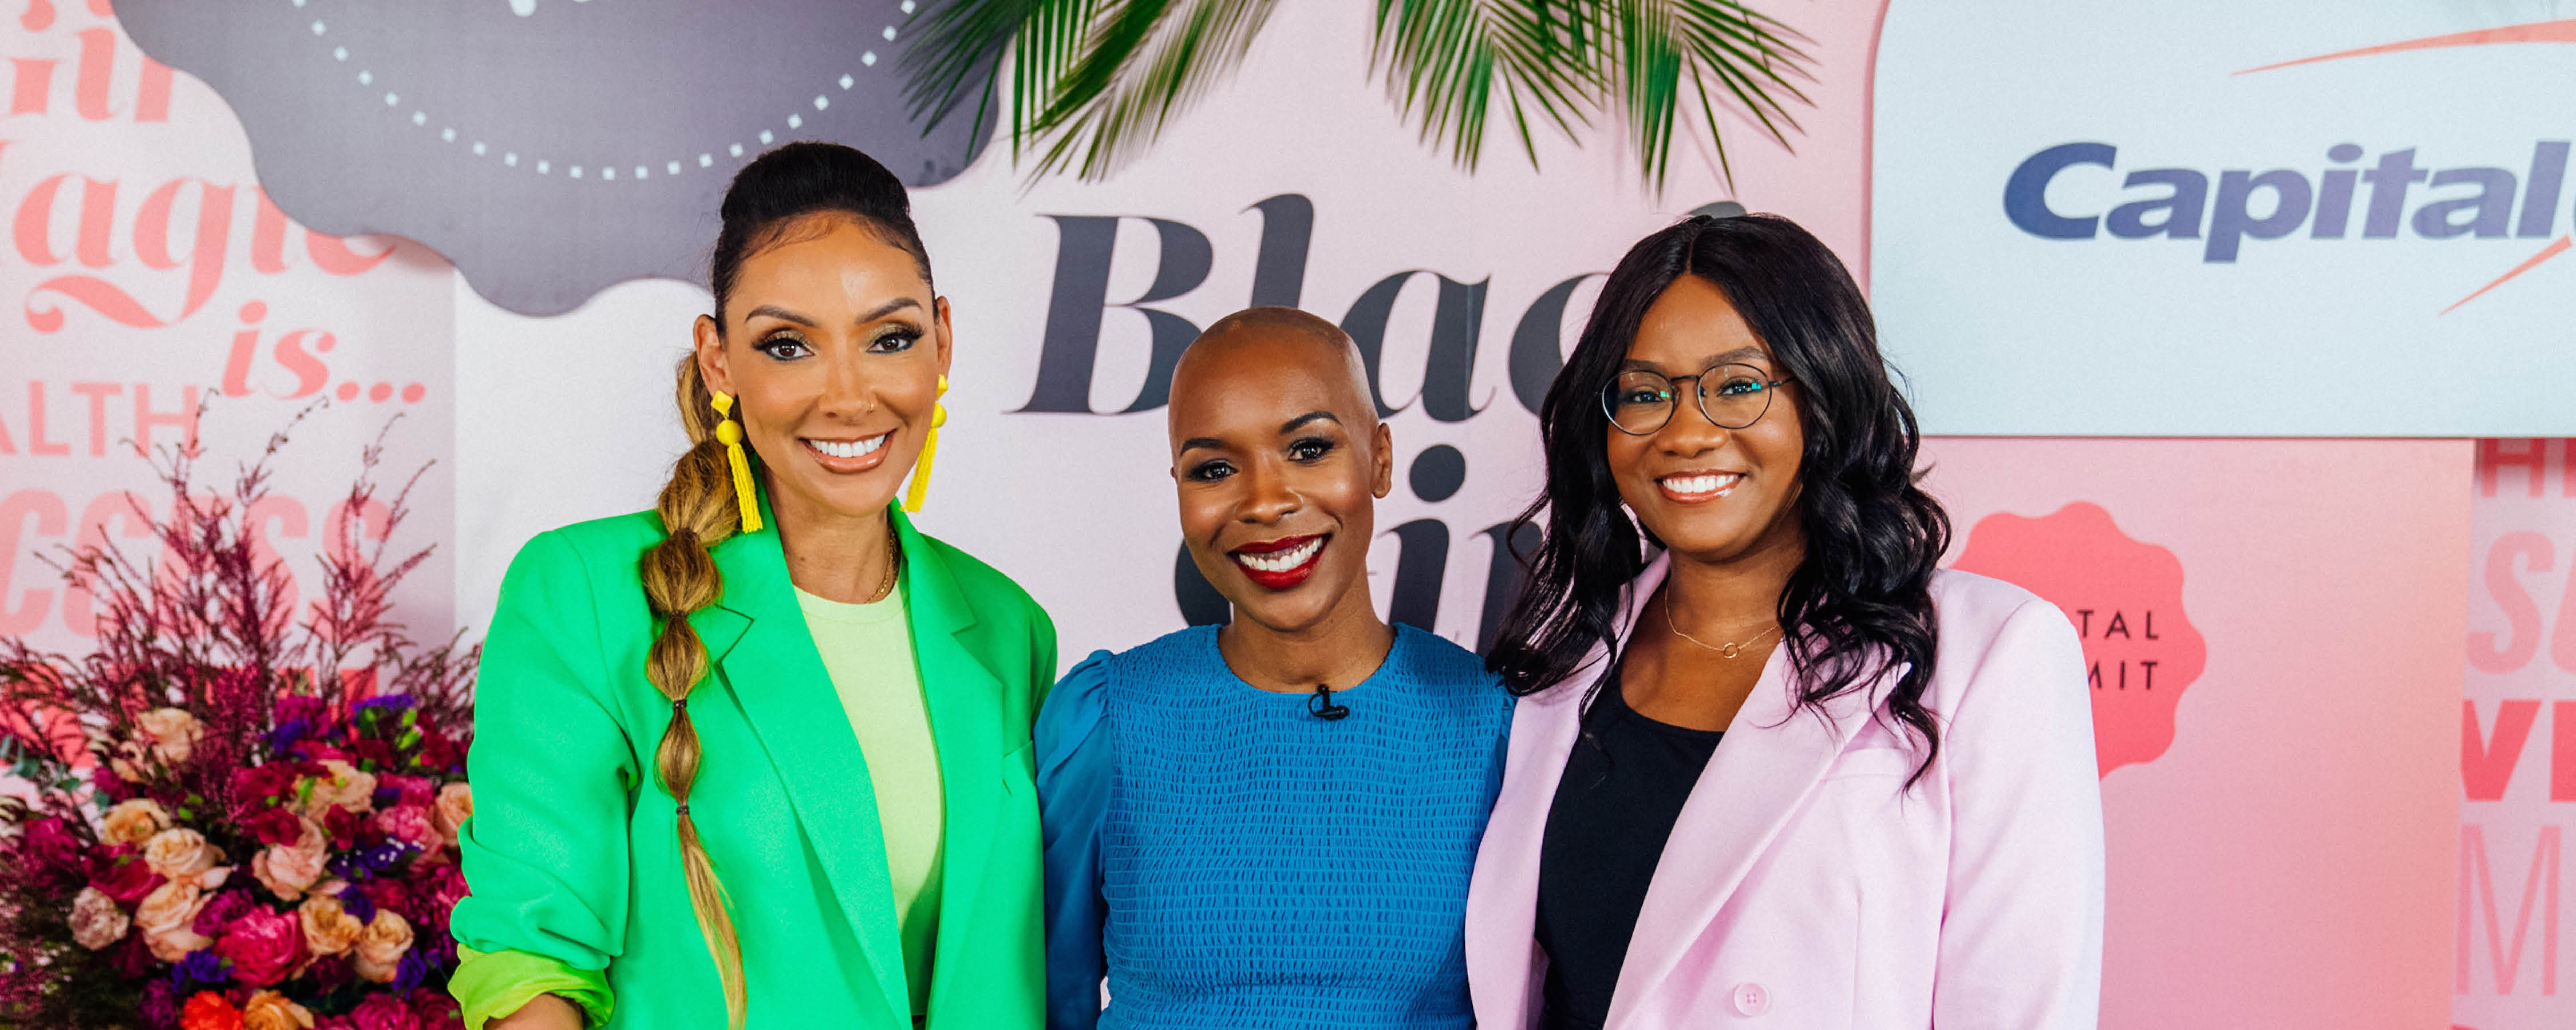 Three Capital One associates stand at the Black Girl Magic event in colorful outfits, standing in front of the Capital One Black Girl Magic Sign